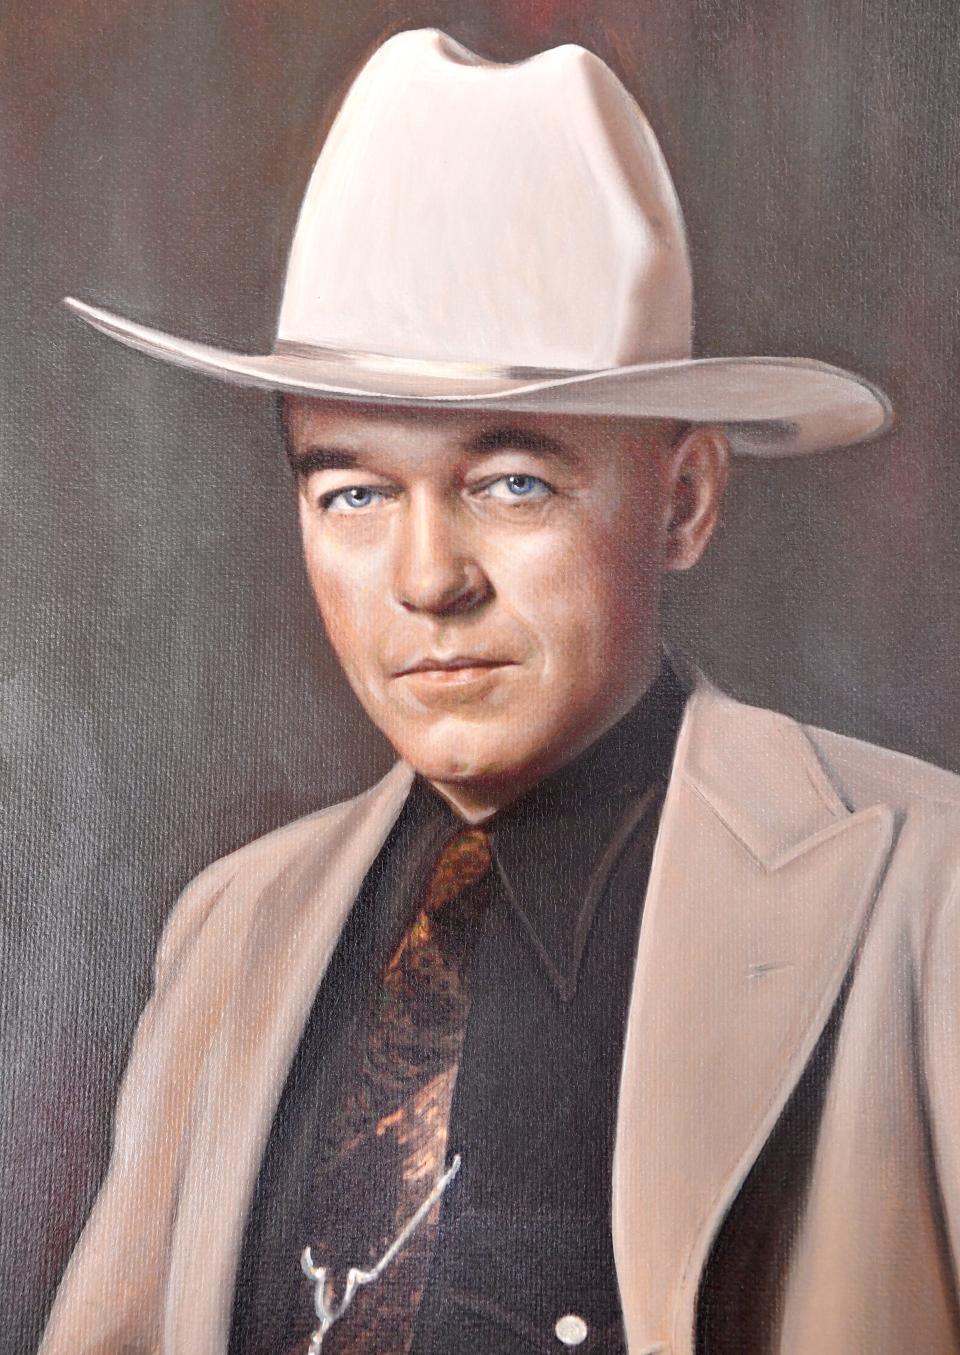 A painting of Dublin Rodeo founder Everett Colborn hangs in the Dublin Rodeo Heritage Museum.